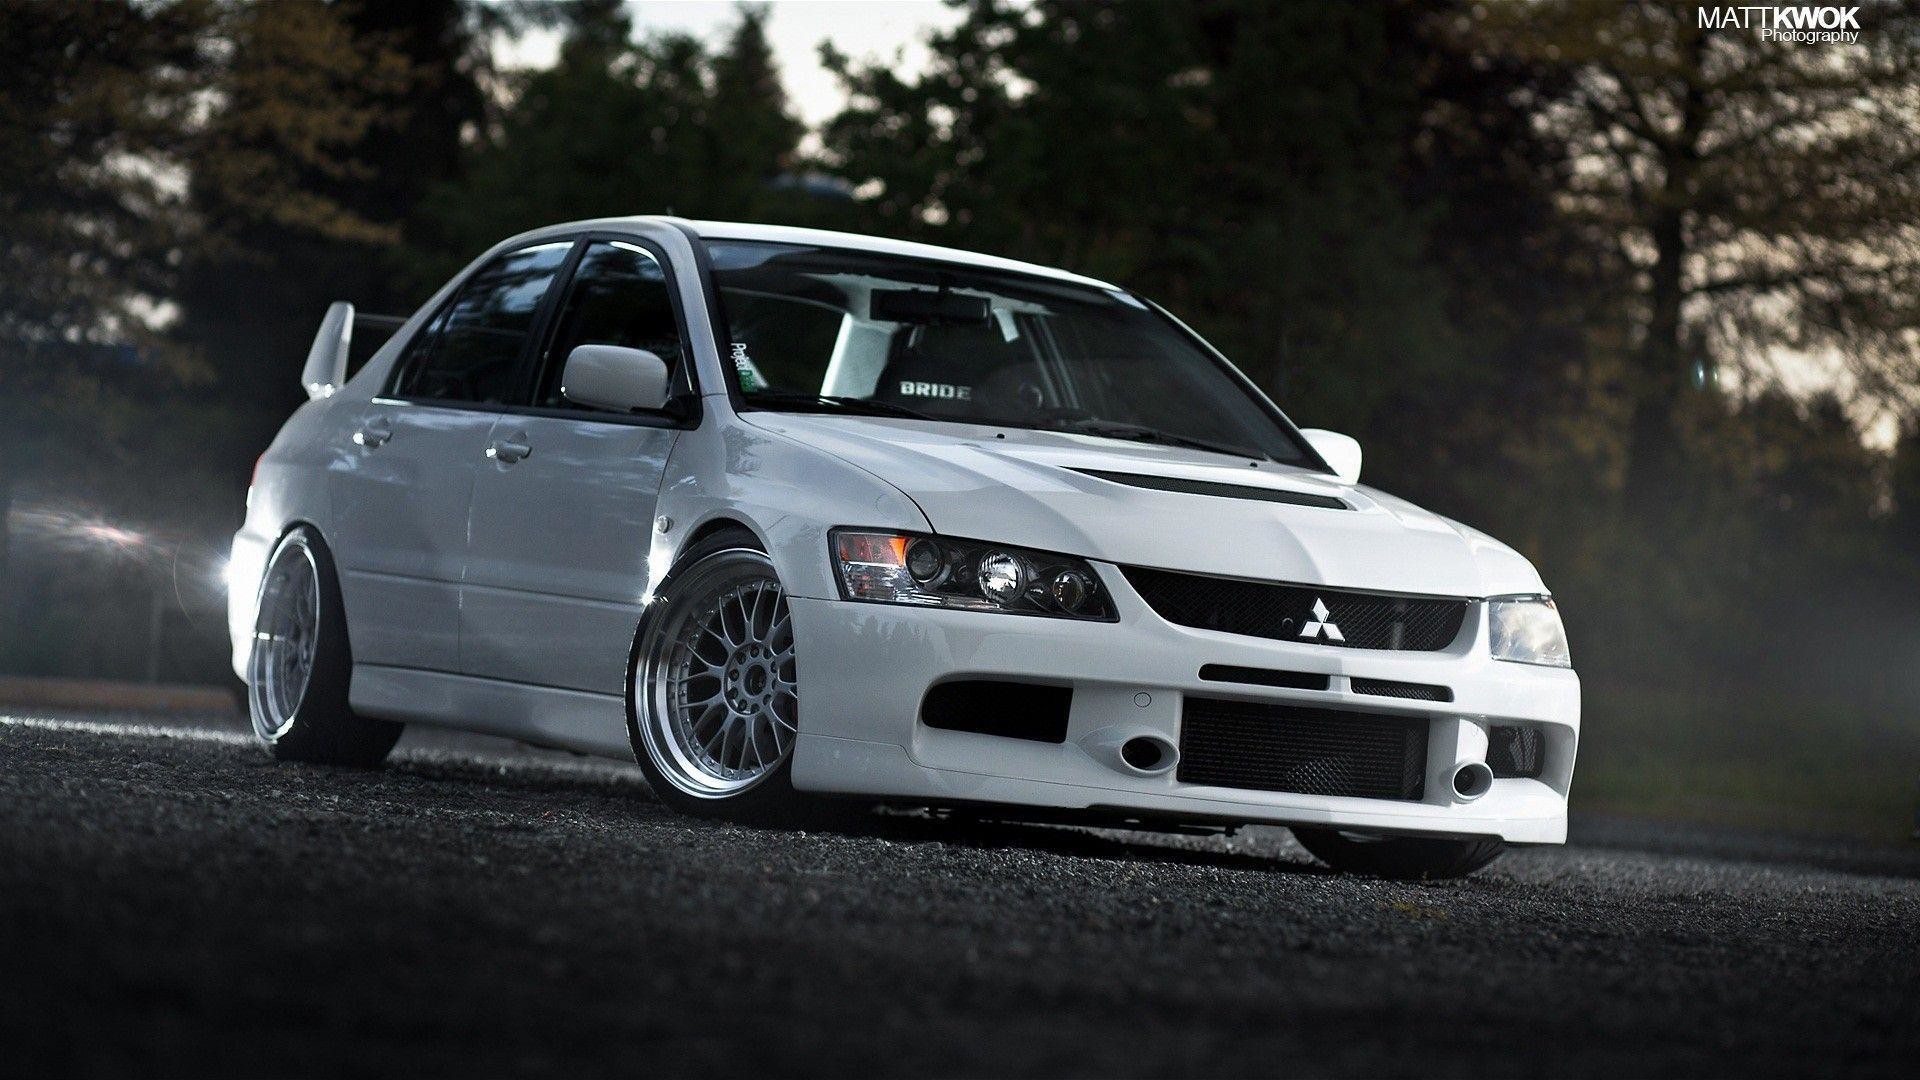 Mitsubishi Evo 8 Wallpaper 59 Pictures Images, Photos, Reviews